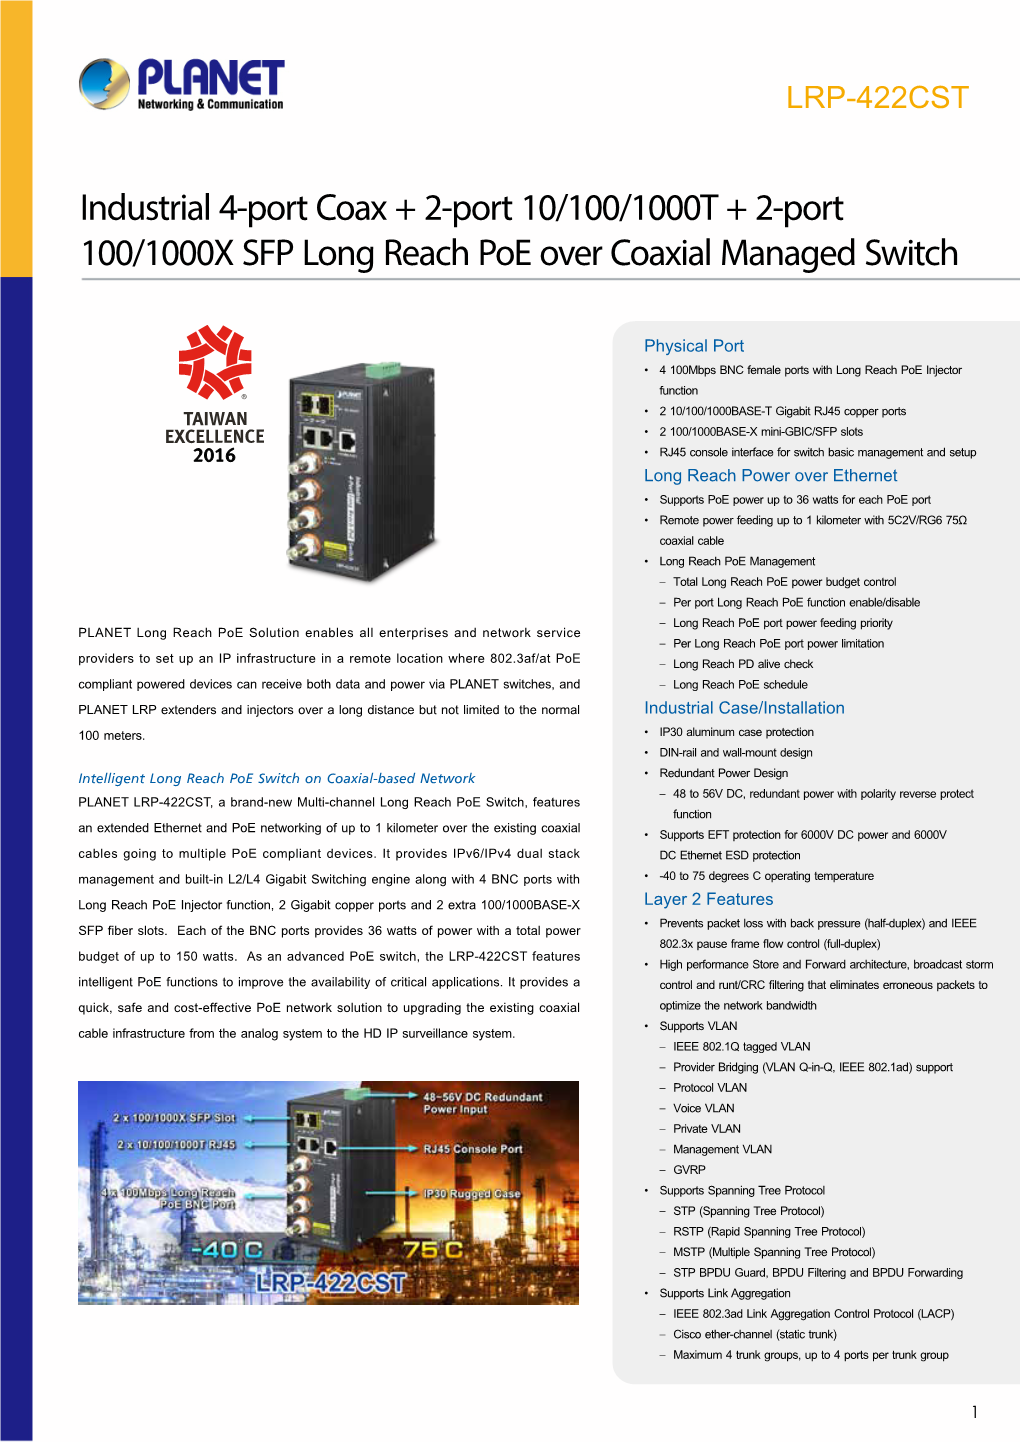 Industrial 4-Port Coax + 2-Port 10/100/1000T + 2-Port 100/1000X SFP Long Reach Poe Over Coaxial Managed Switch